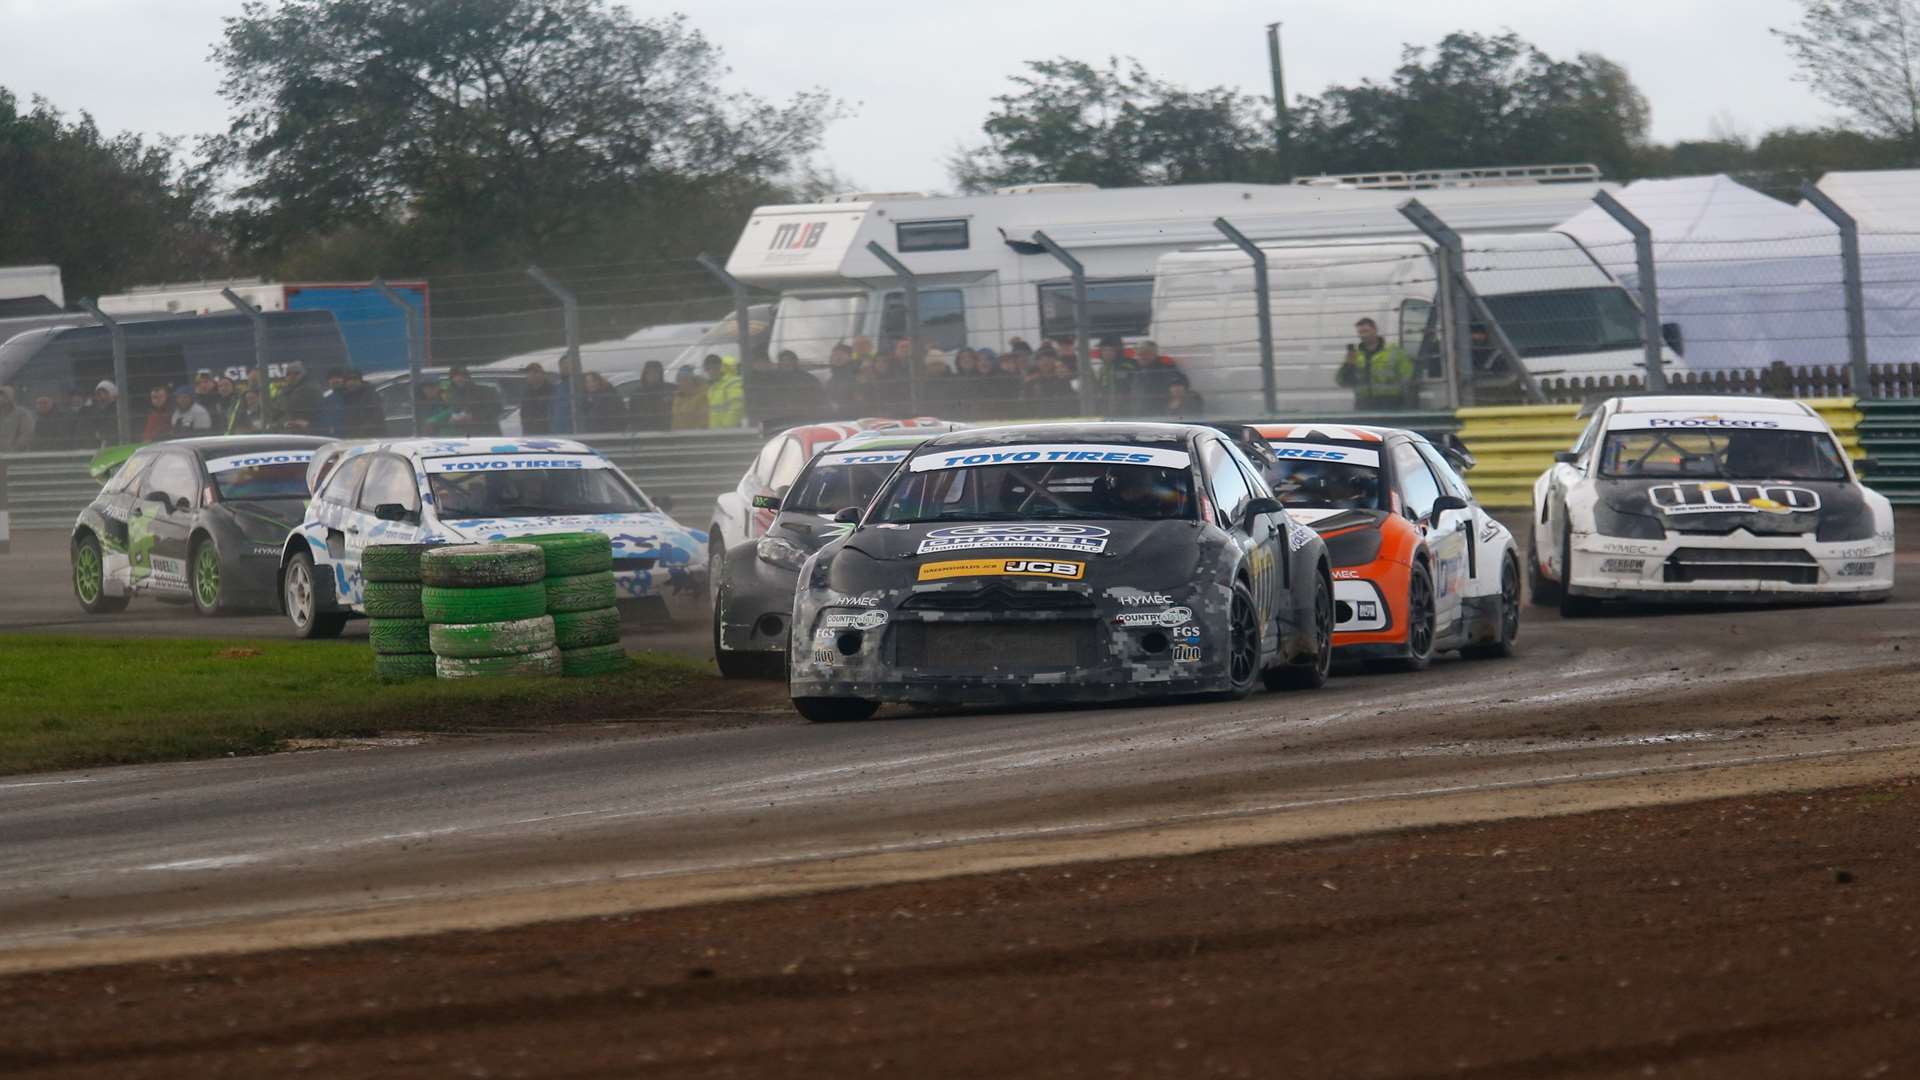 Heathcote leads the pack at Croft. Picture: Matt Bristow